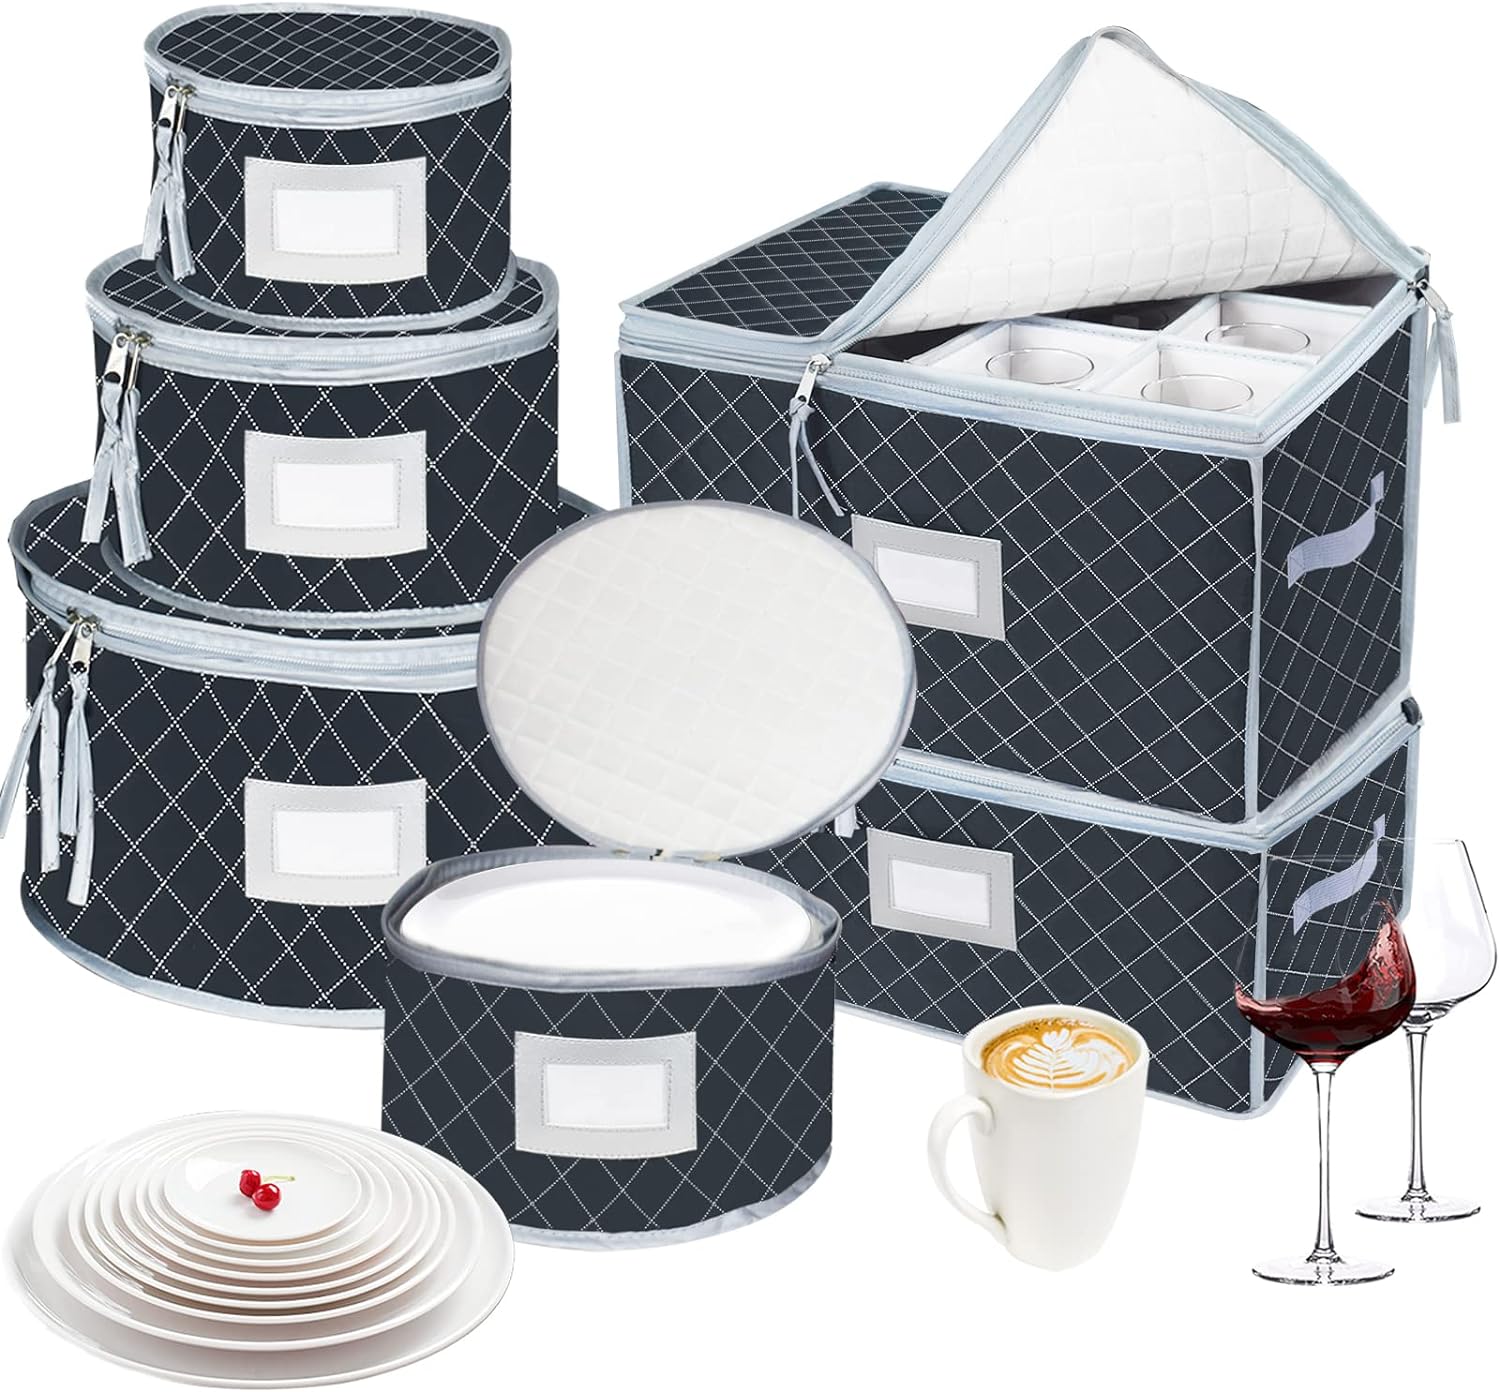 VERONLY China Dinnerware Storage Containers Set- Dish,Mug,Stemware Storage Cases - Quilted Box Bins Stackable with Divider,handles,Clear Window for Cups,Plates,Wine Glasses Moving Set of 6